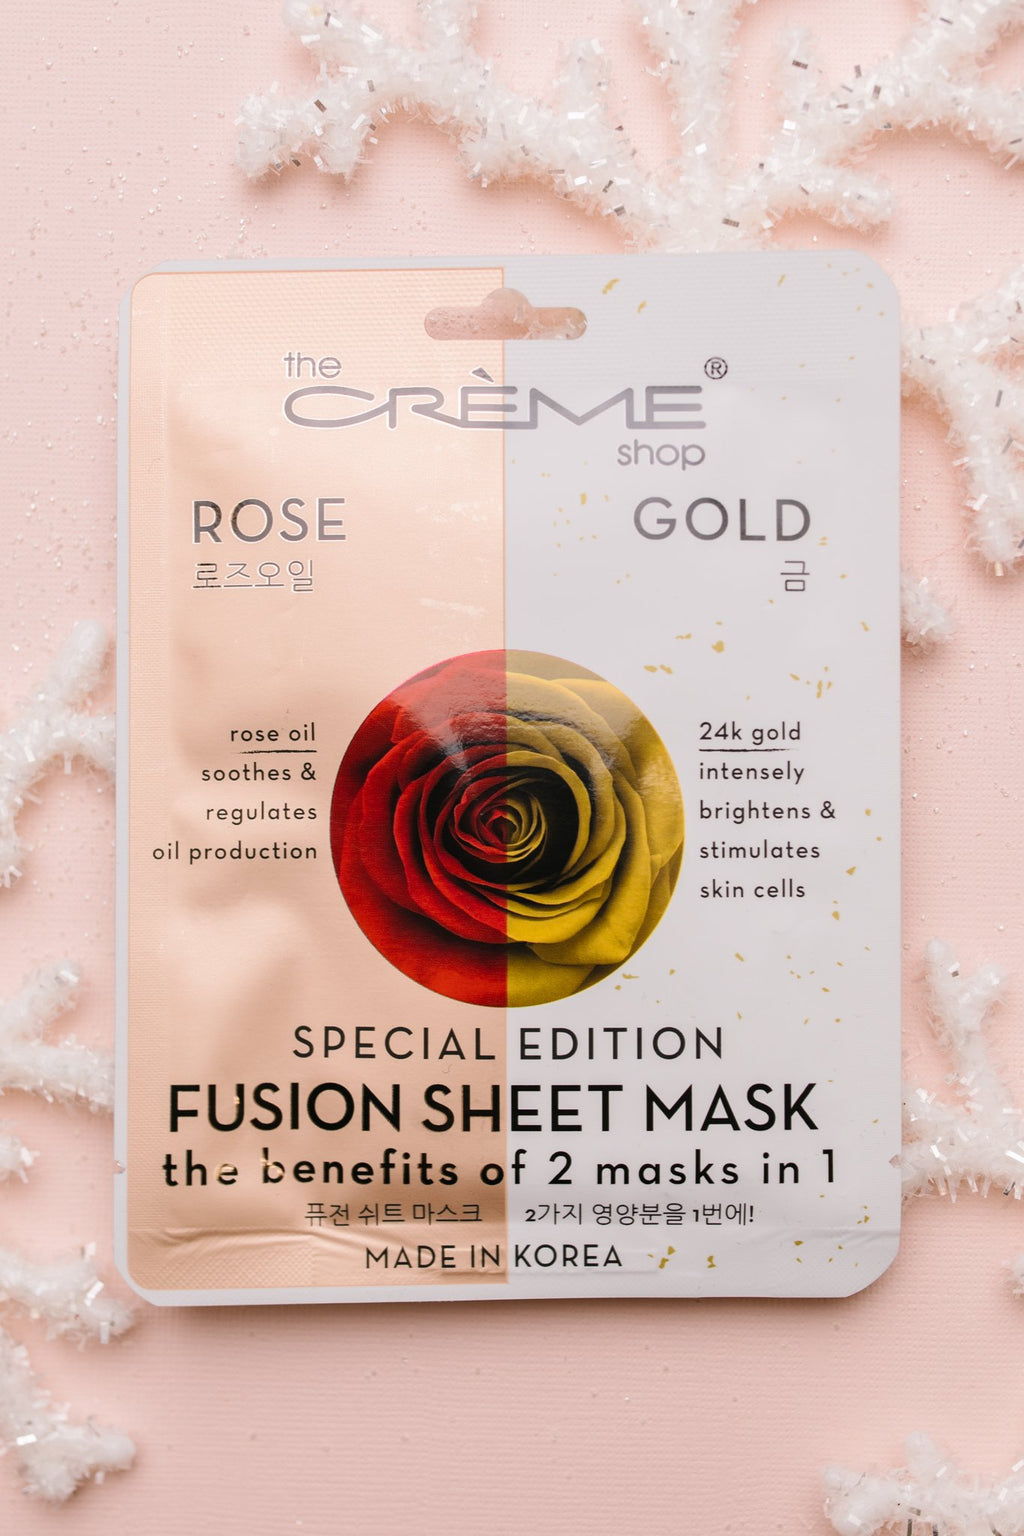 Rose Meets Gold Face Mask